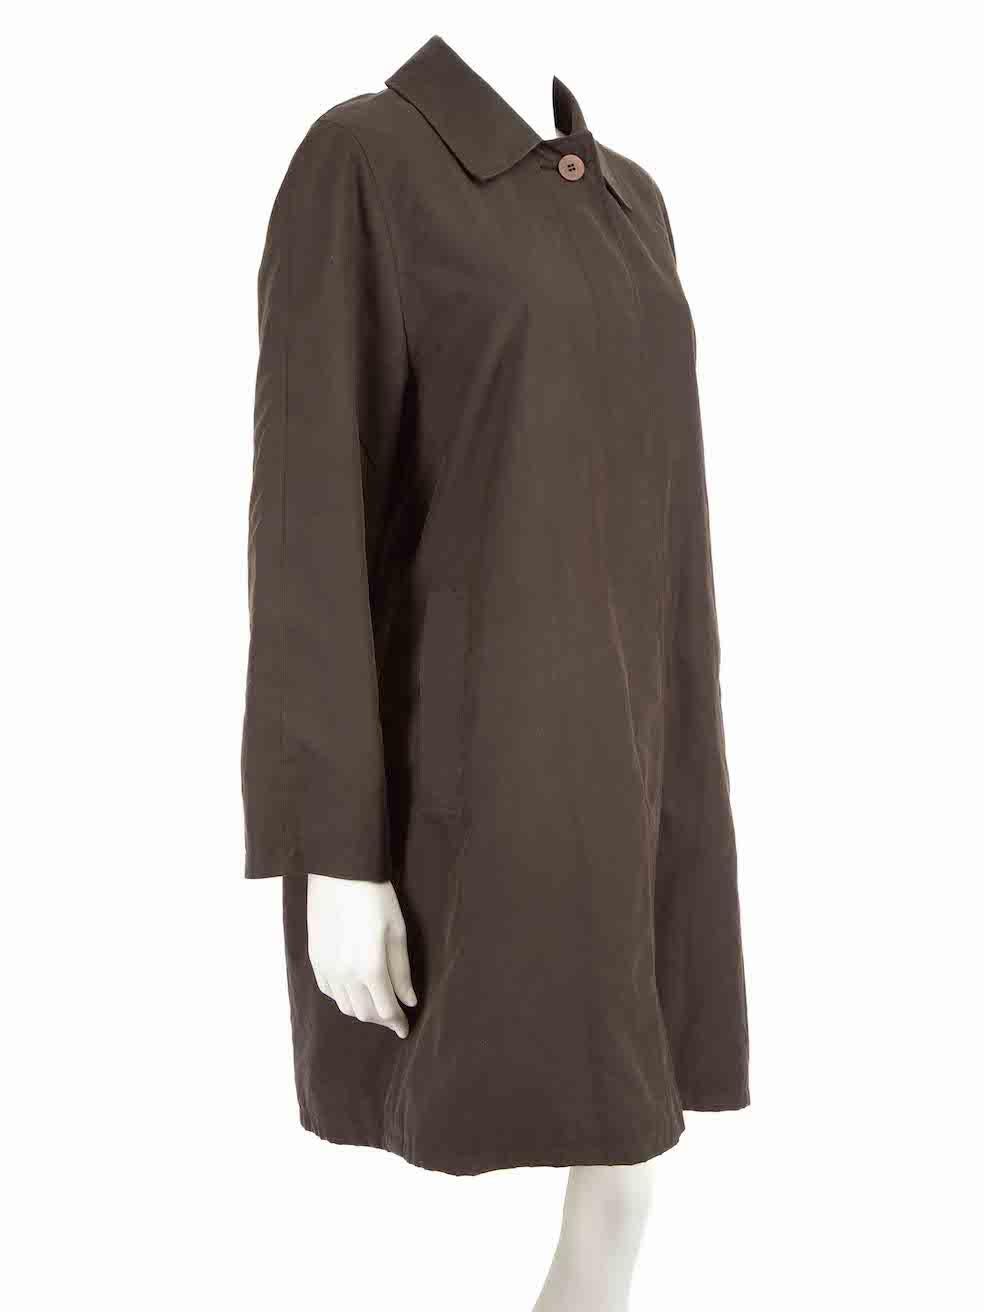 CONDITION is Very good. Hardly any visible wear to coat is evident. However, the size label is missing on this used Aquascutum designer resale item.
 
 Details
 Vintage
 Kenmore Heritage Raglan model
 Brown
 Polyester
 Raincoat
 Mid length
 Single